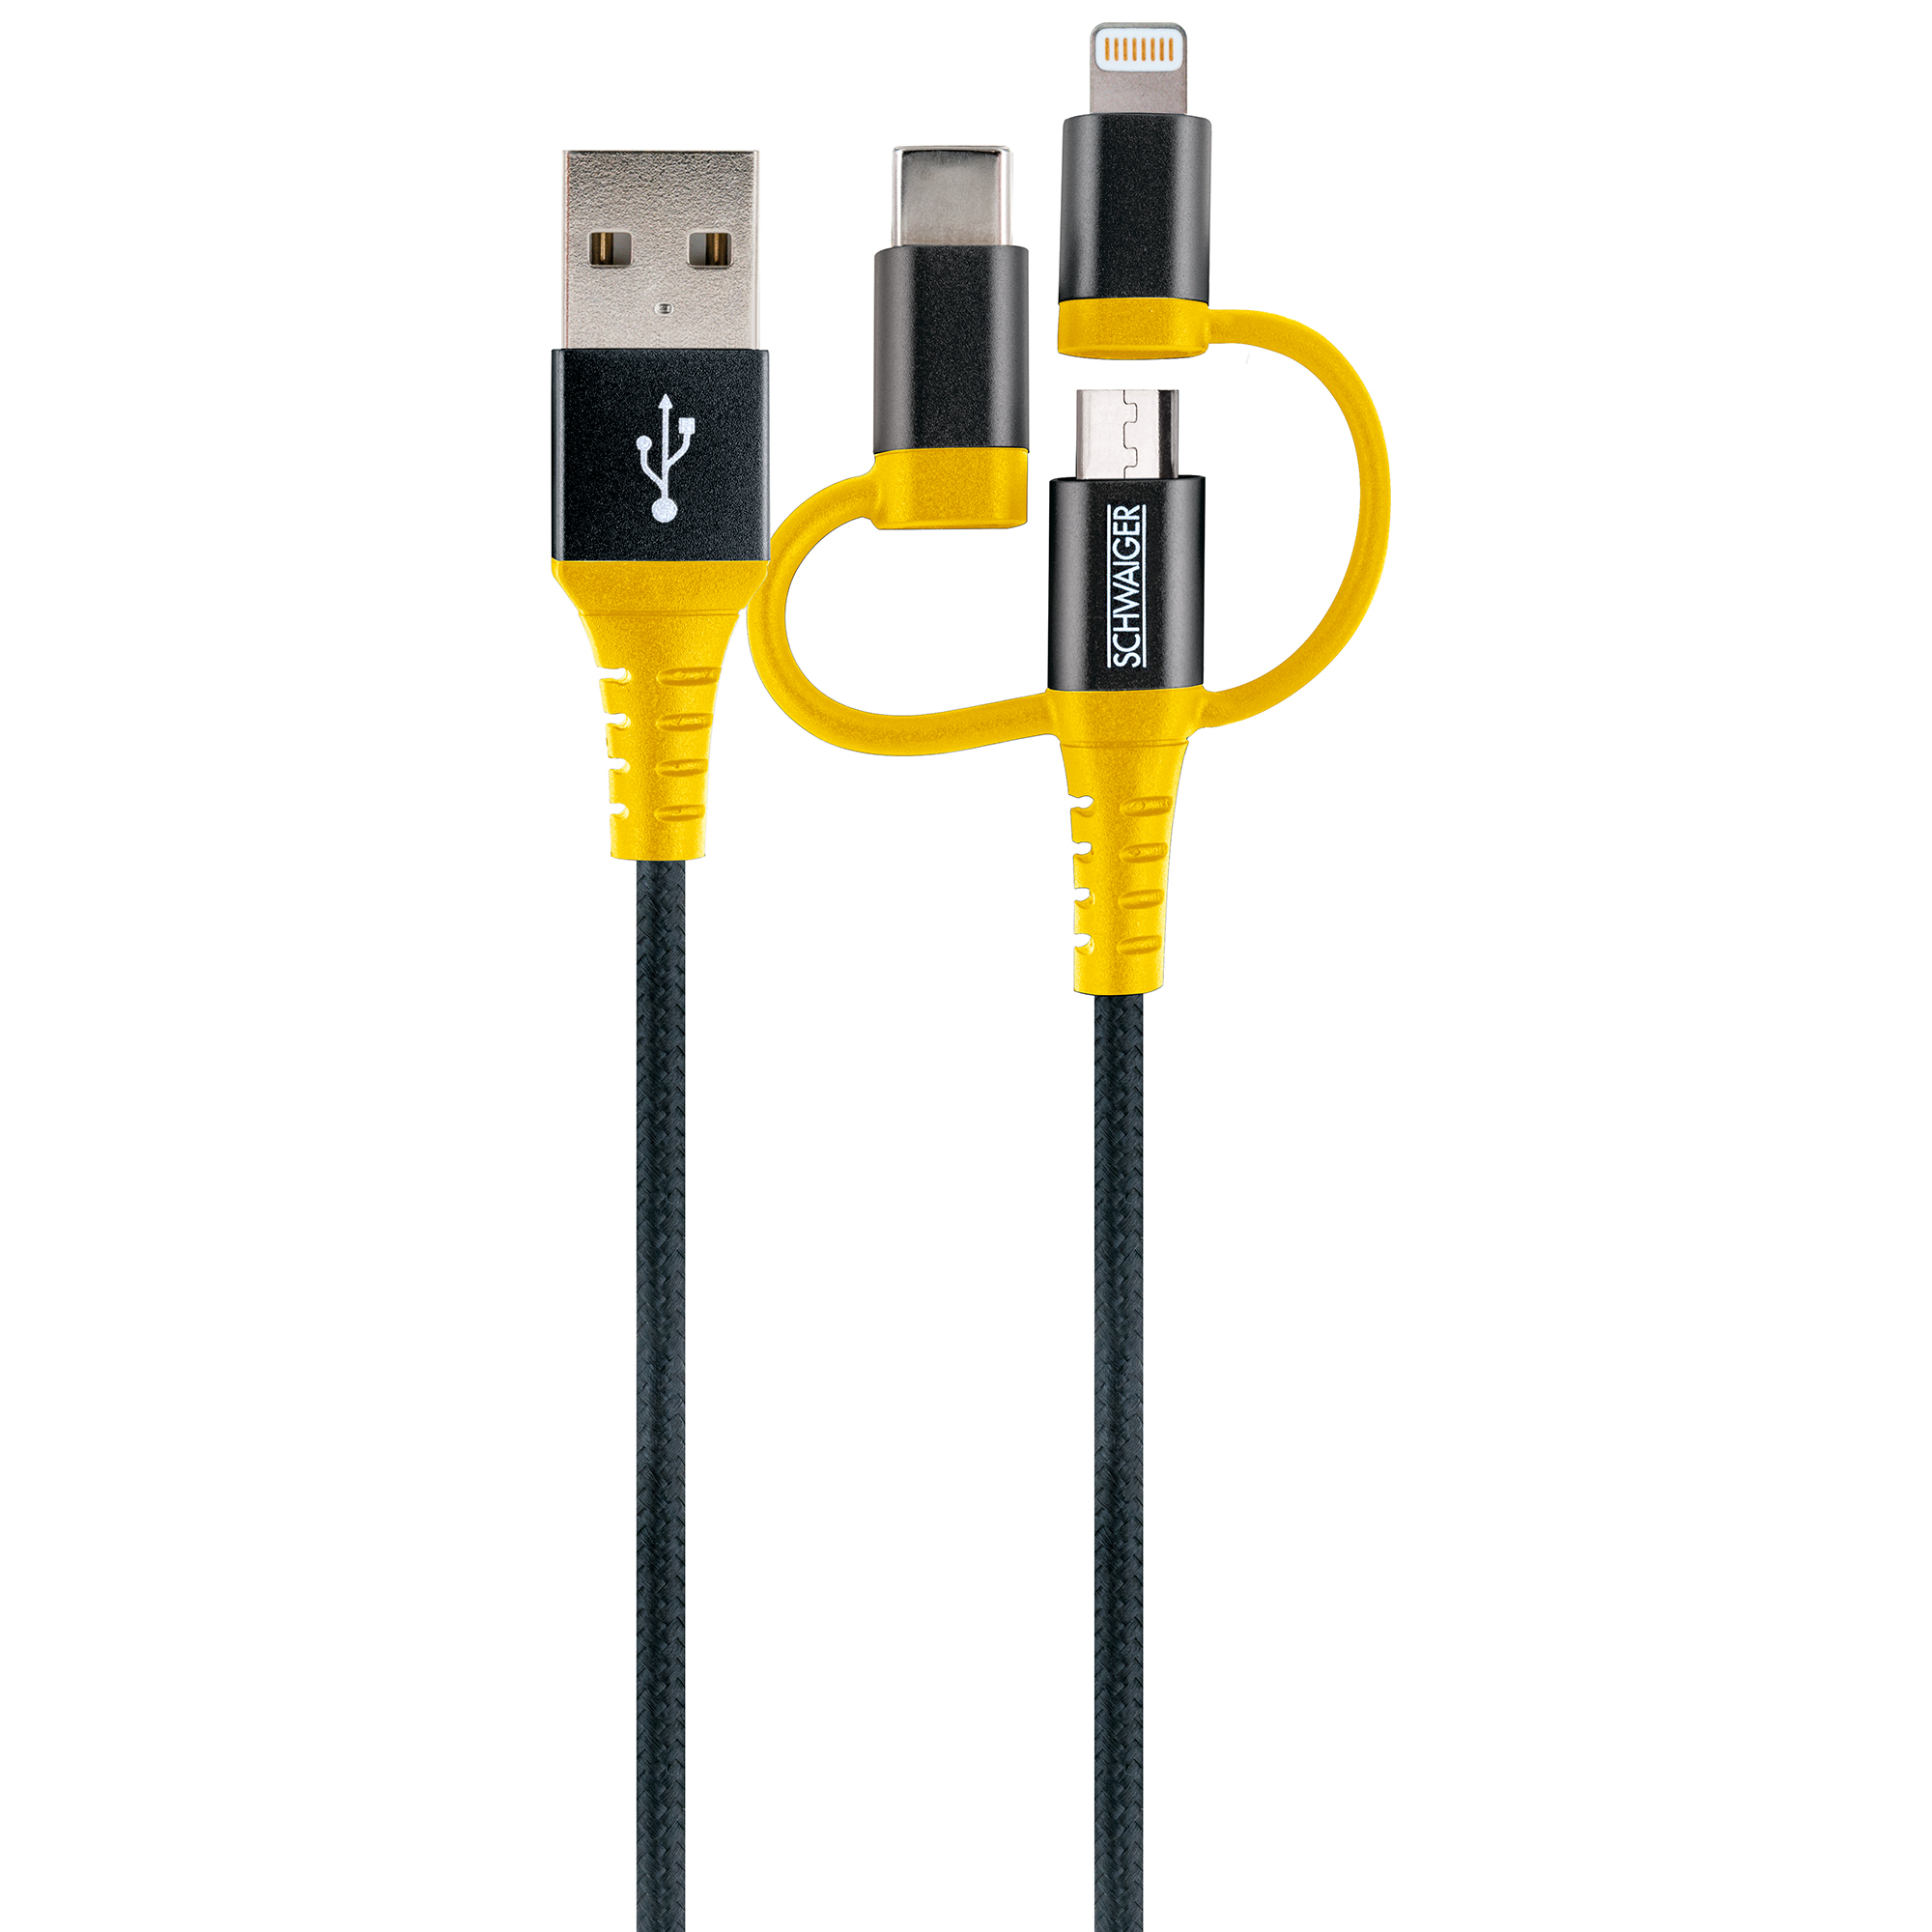 3-in-1 Sync & Ladekabel 'Extreme' WKUU310 511 + product picture